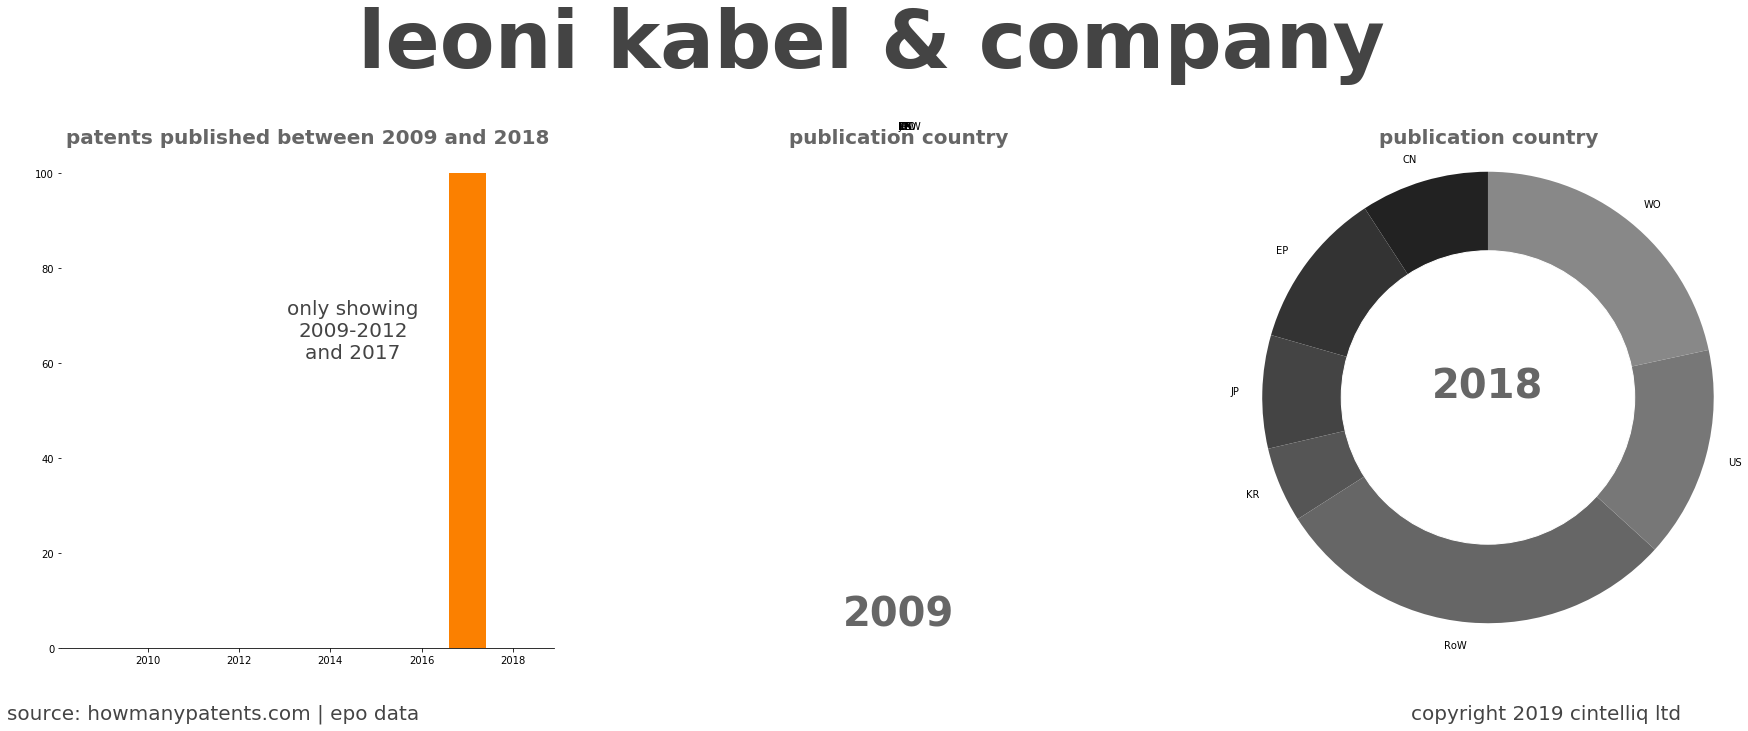 summary of patents for Leoni Kabel & Company